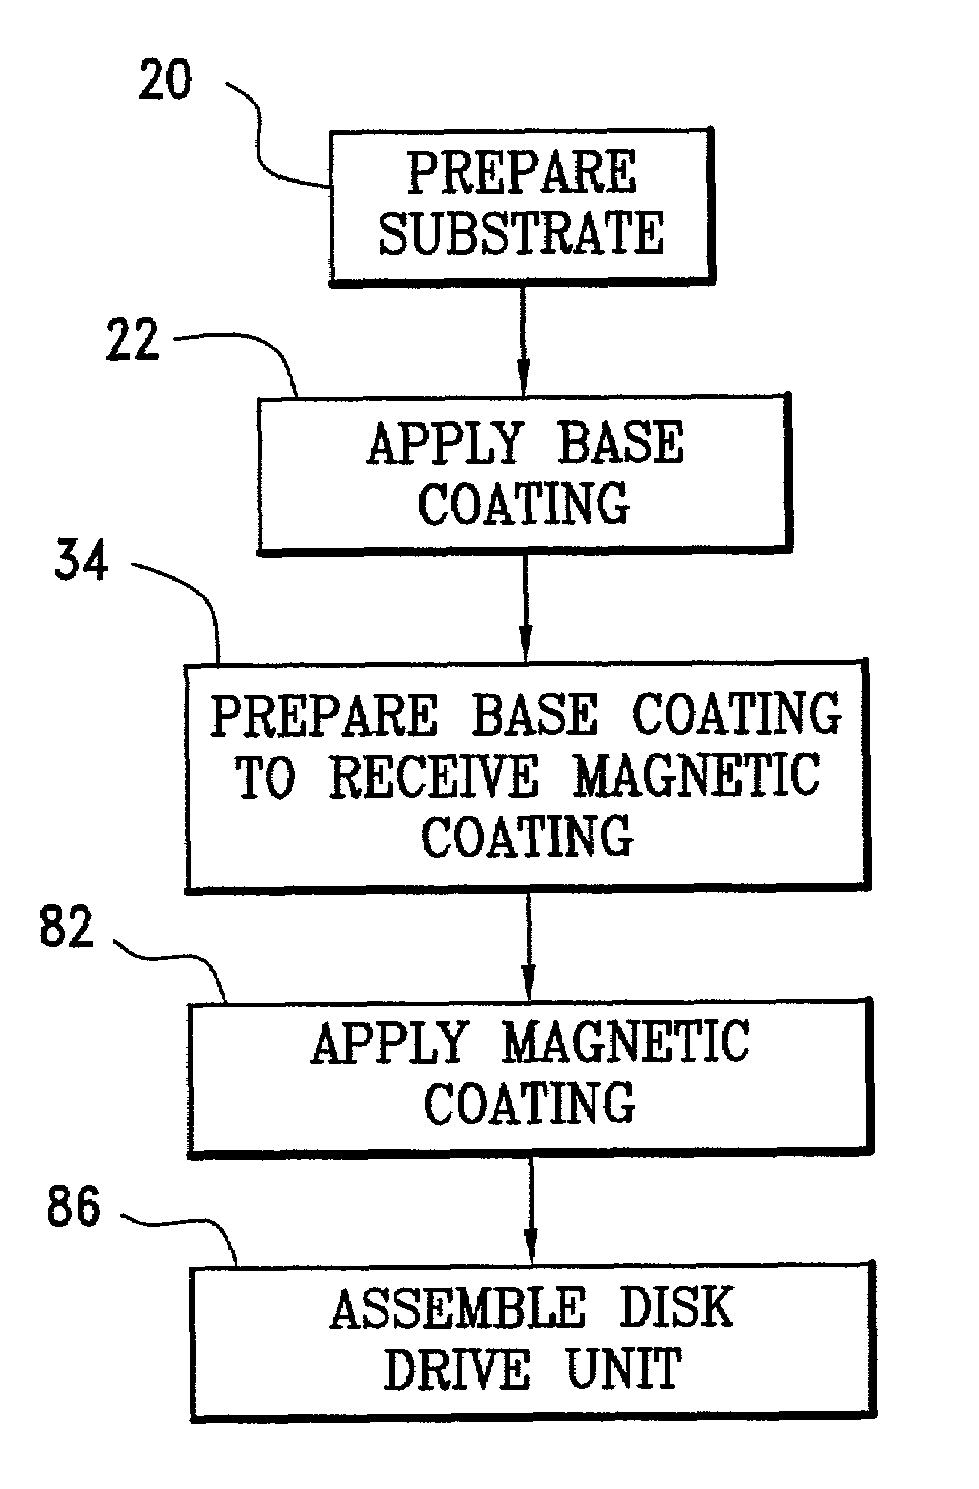 Disk, method for making it free of asperities utilizing a step of exposing a surface of the disk to a gas cluster ion beam and disk drive unit for using the disk